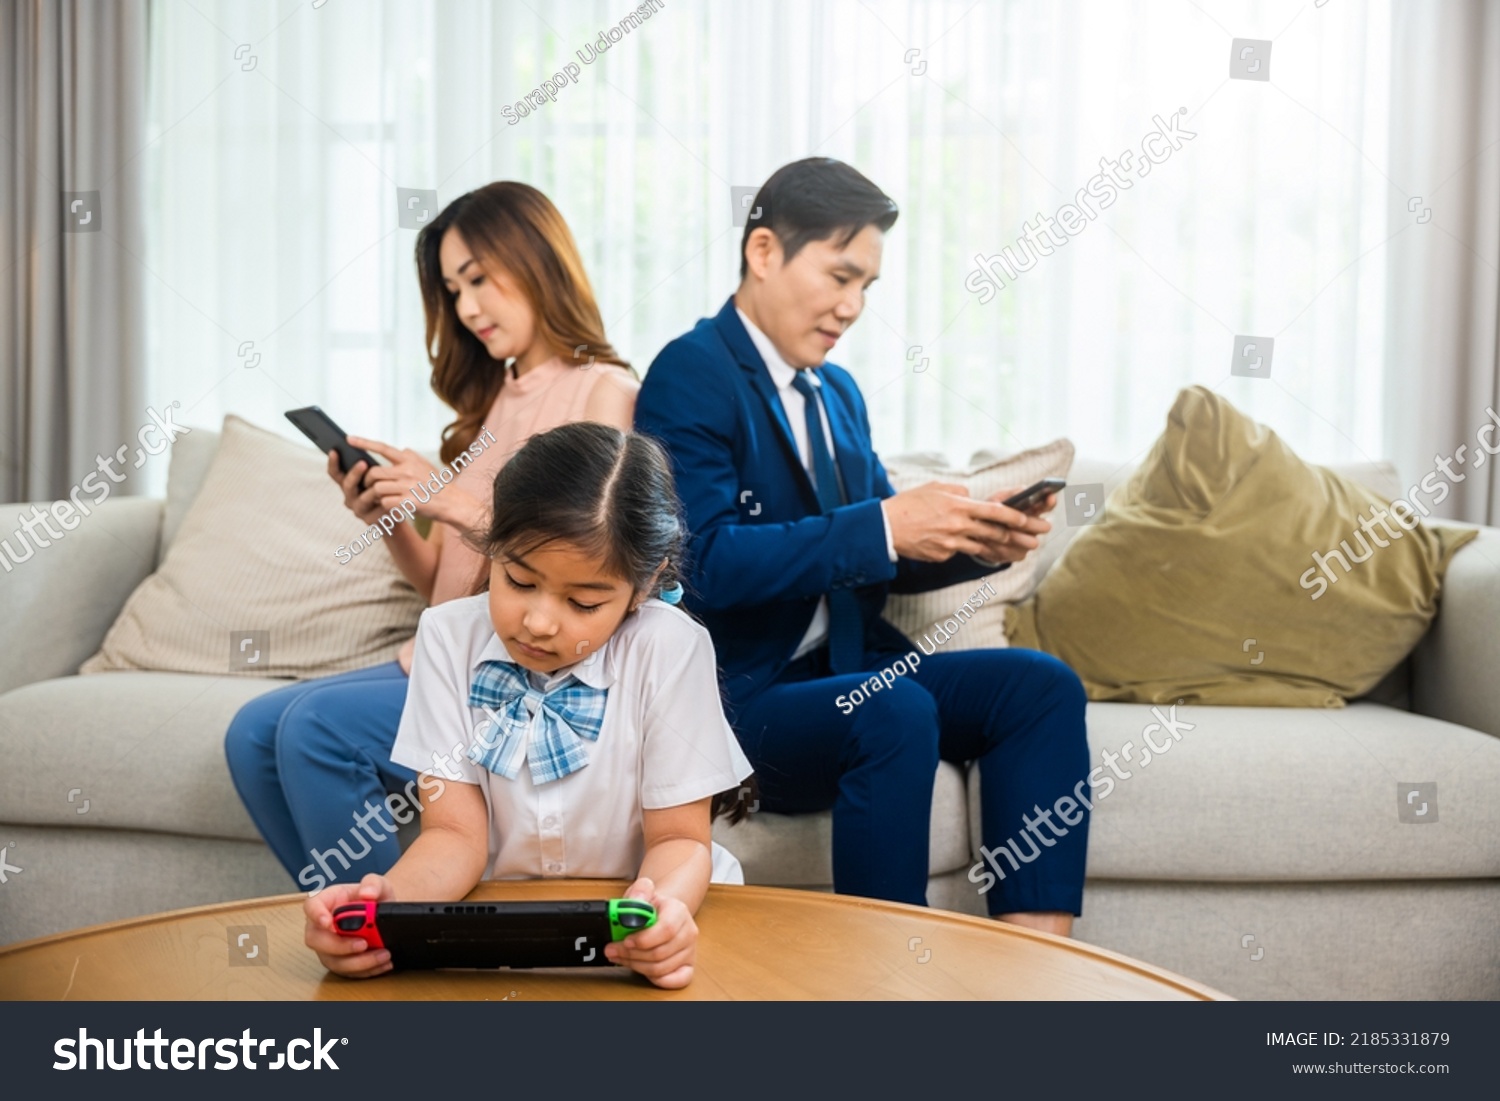 Family don't care about each other. Asian parents ignore their child and looking at their mobile phone at home, gadgets dependence overuse internet social media addiction on sofa living room #2185331879